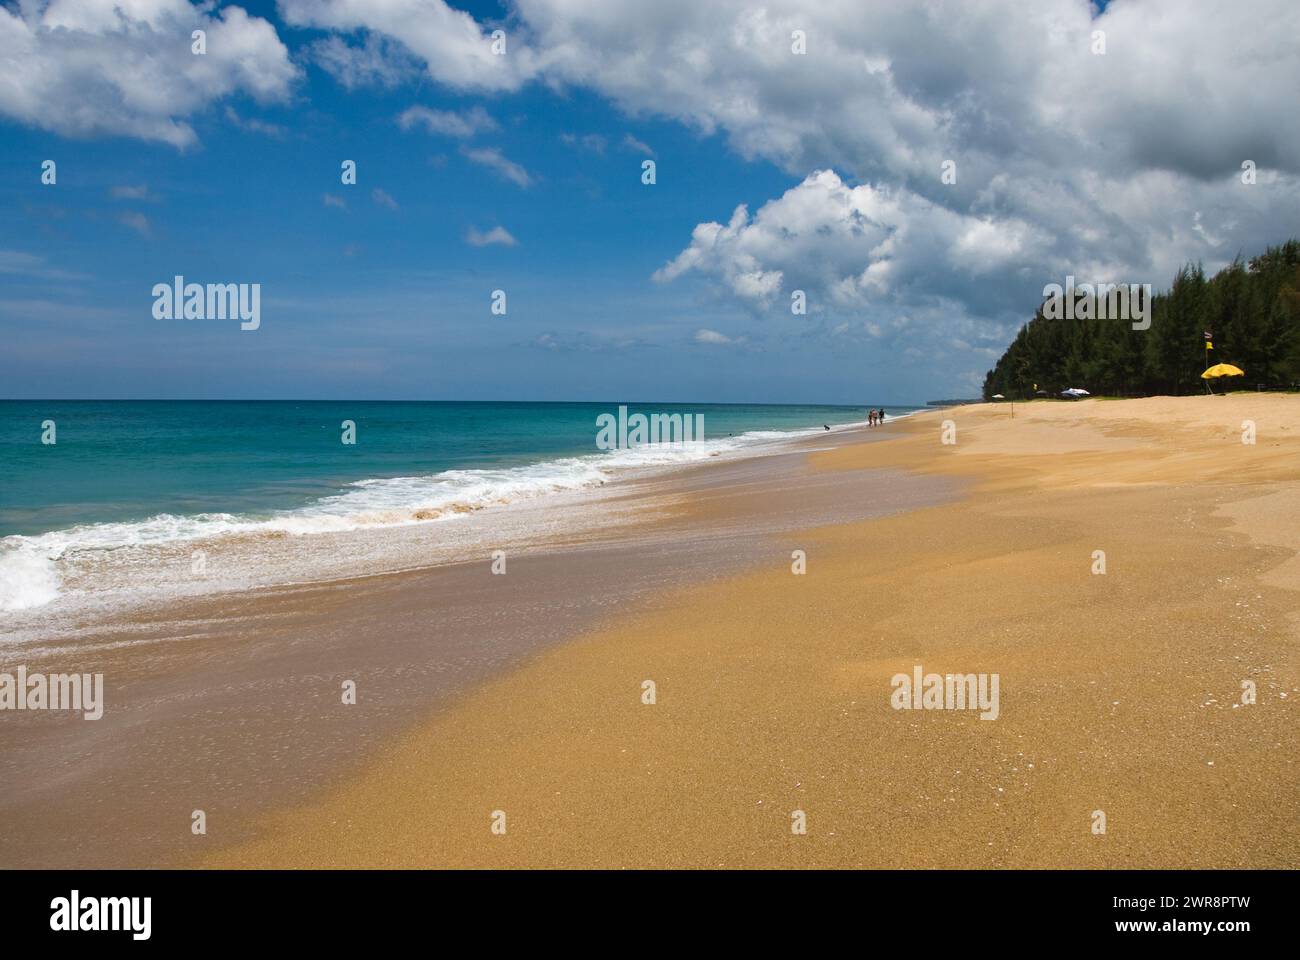 Sandy beach under clear blue sky, waves rolling in Stock Photo